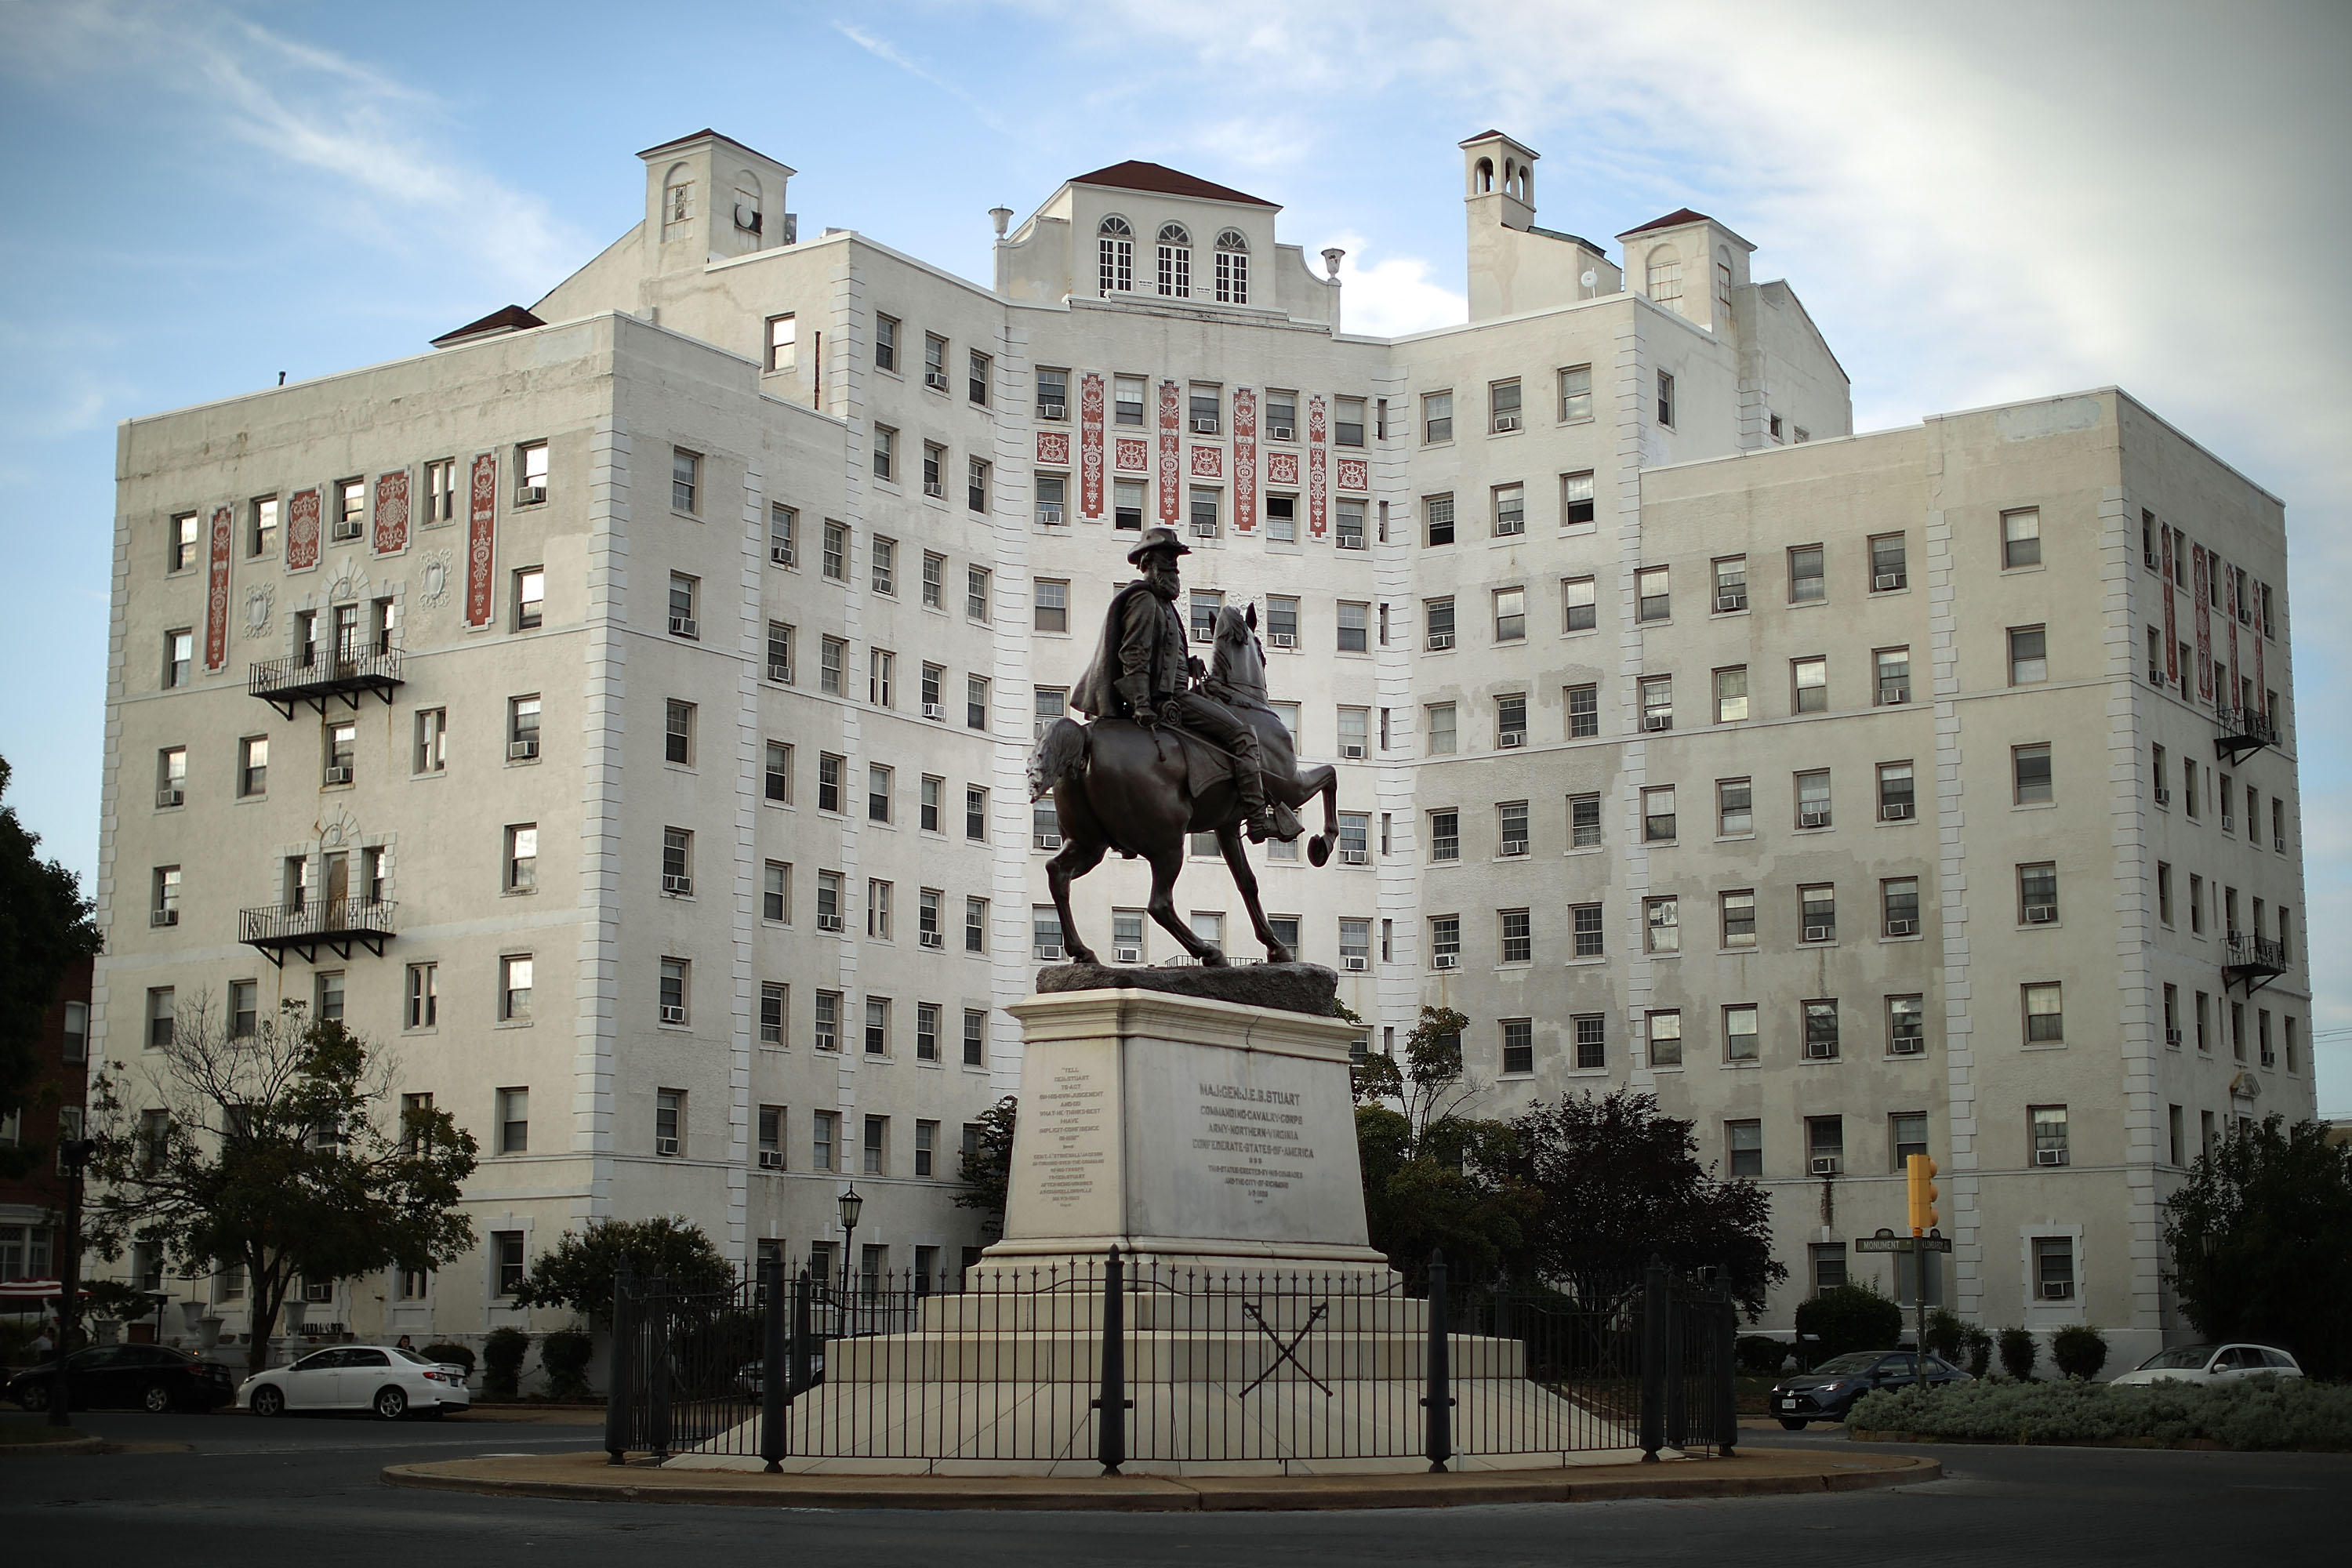 A statue of Confederate General J.E.B. Stuart, unveild in 1907, stands at the center of Stuart Circle along Monument Avenue August 23, 2017 in Richmond, Virginia. Richmond Mayor Levar Stoney's Monument Avenue Commission -- composed of academics, historians and community leaders -will include an examination of the removal or relocation of some or all of the city's Confederate statues, which depict Civil War Gens. Robert E. Lee, J.E.B. Stuart and Stonewall Jackson; President of the Confederacy Jefferson Davis; and Confederate naval commander Matthew Fontaine Maury. (Photo by Chip Somodevilla/Getty Images)